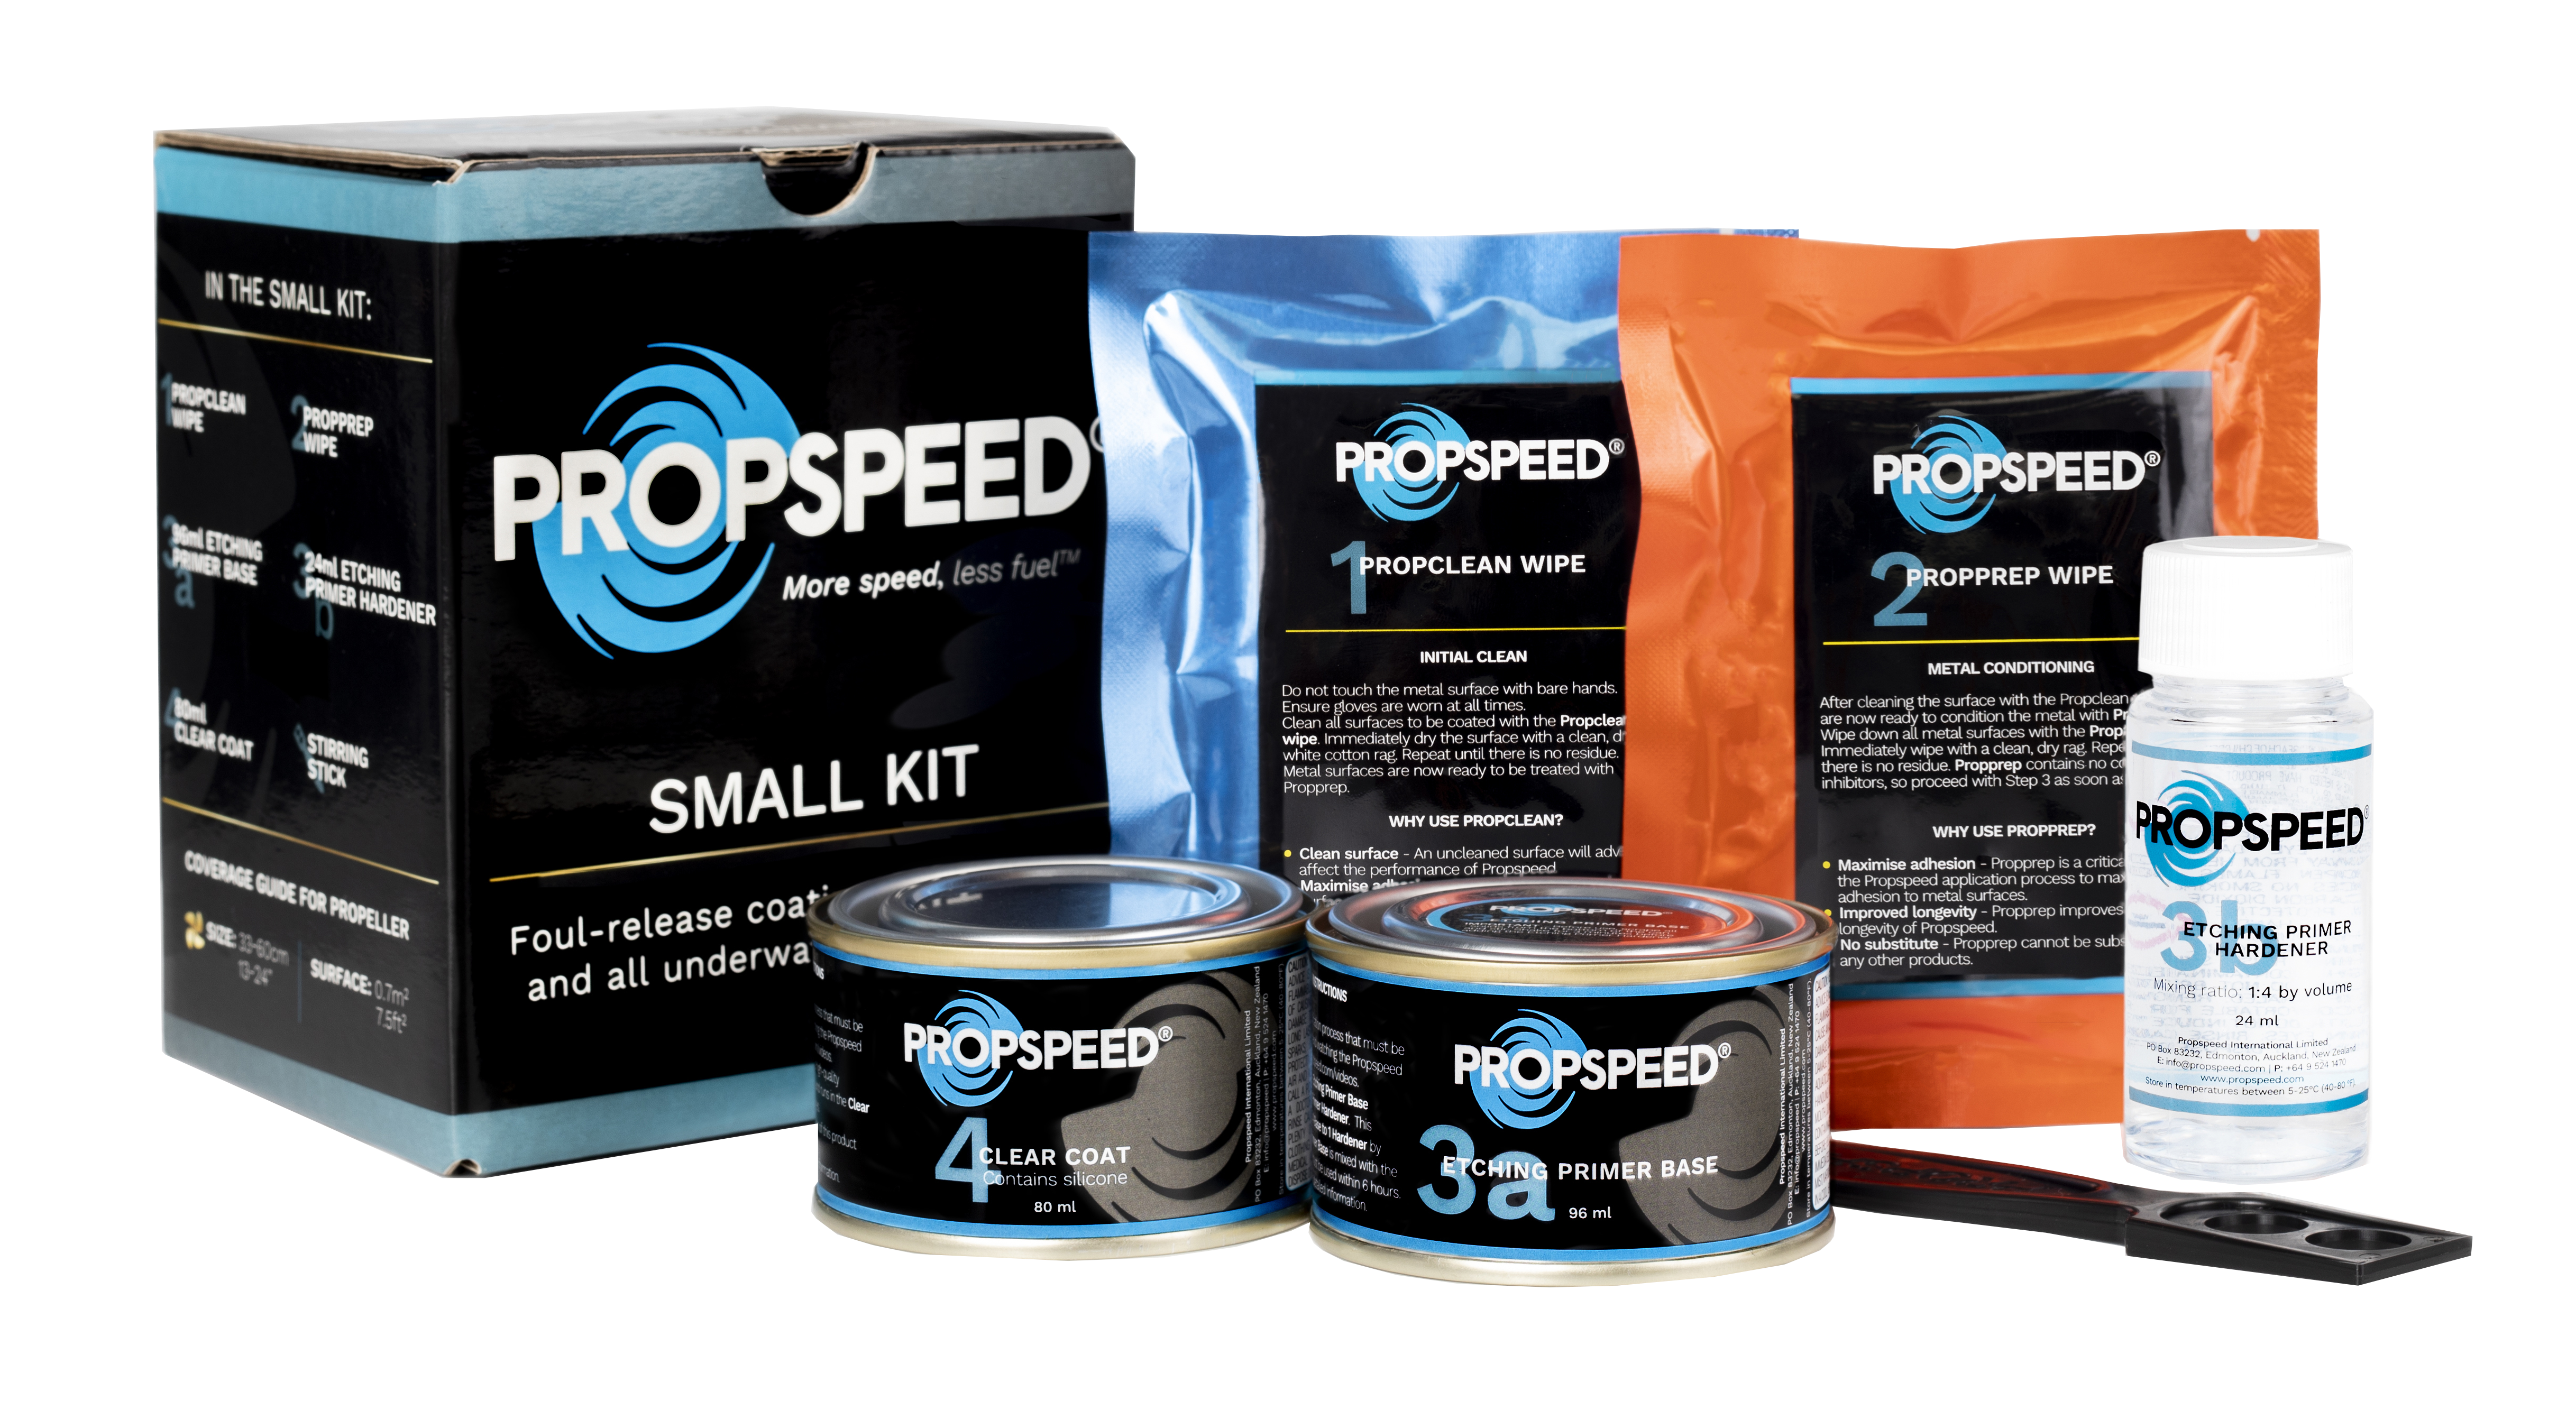 Propspeed_Small_Kit_Box_Contents (1).png